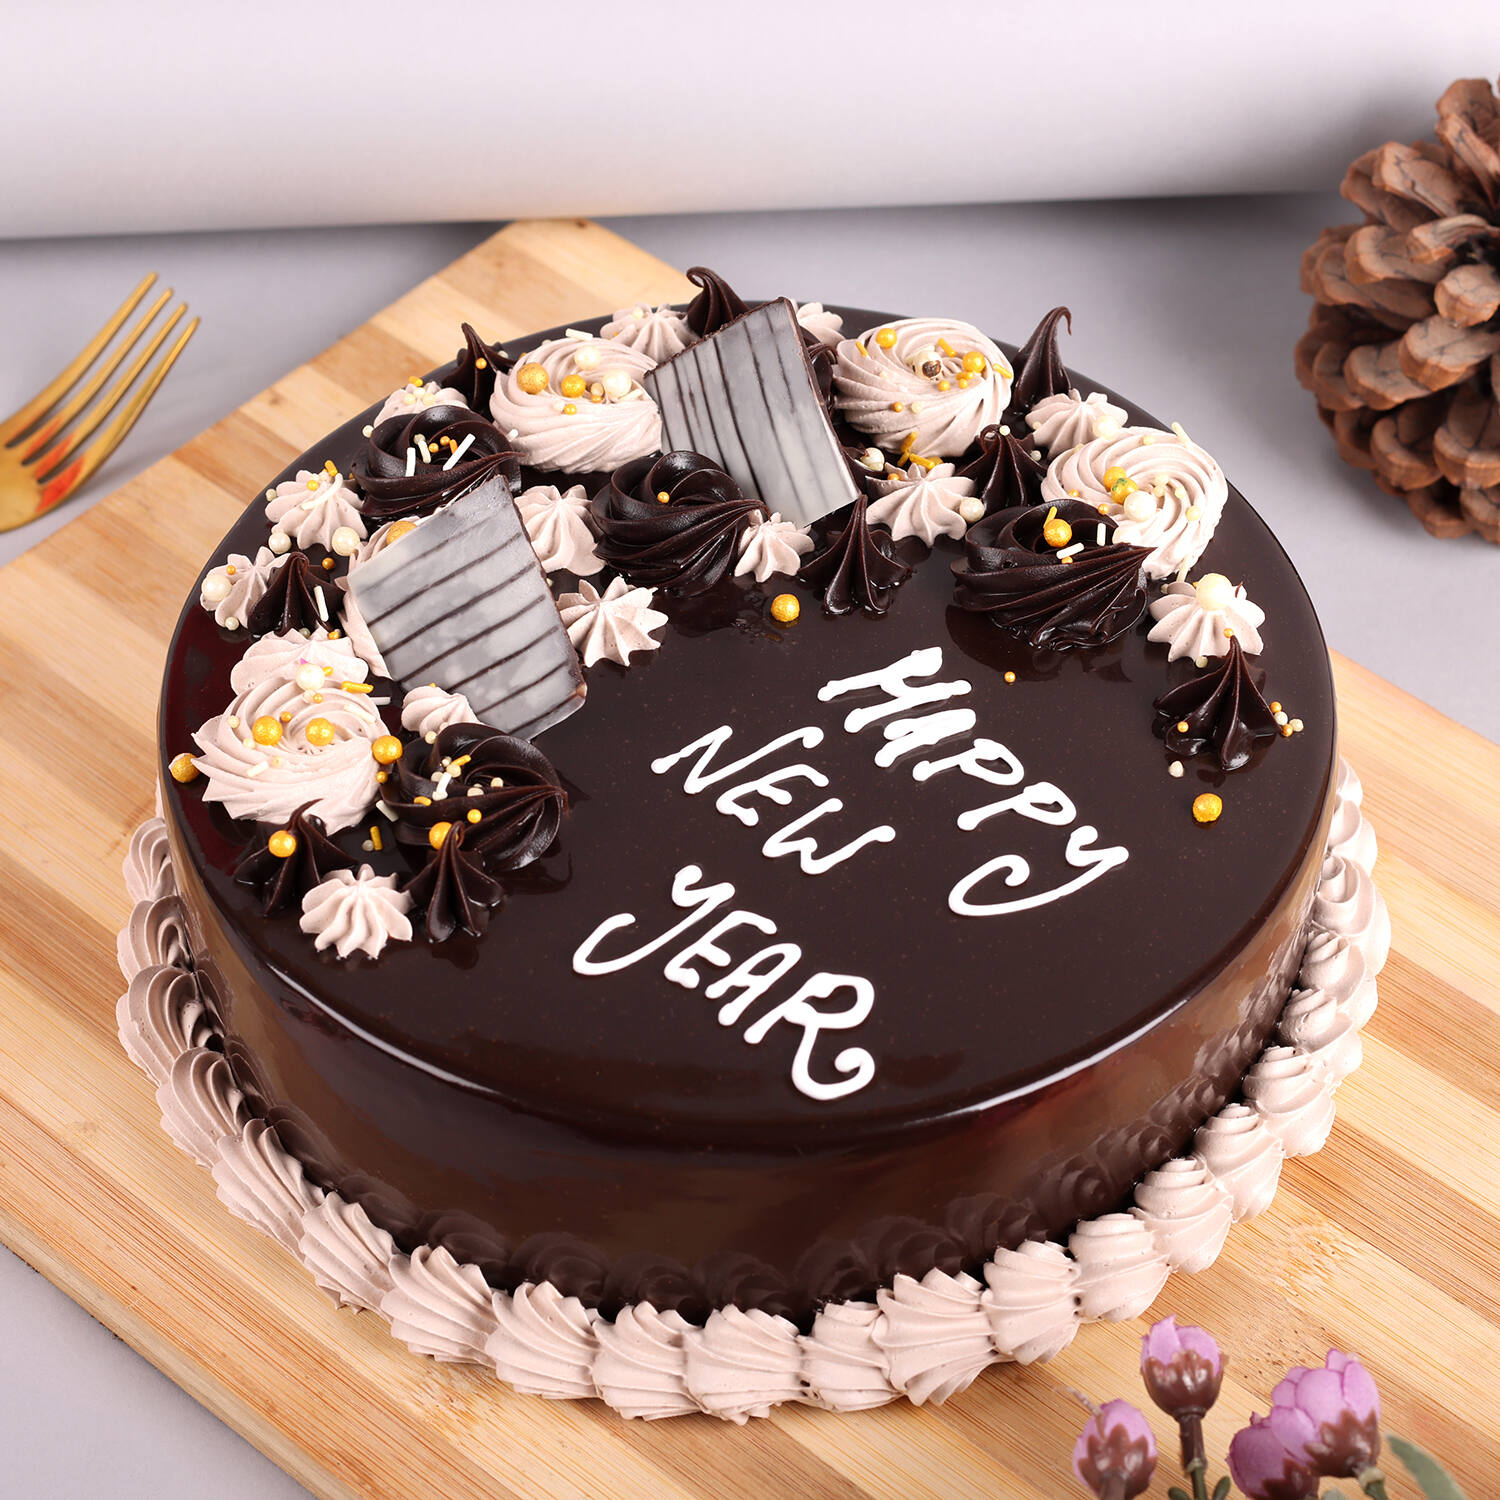 Send Happy New Year Delicious Cake Online in India at Indiagift.in